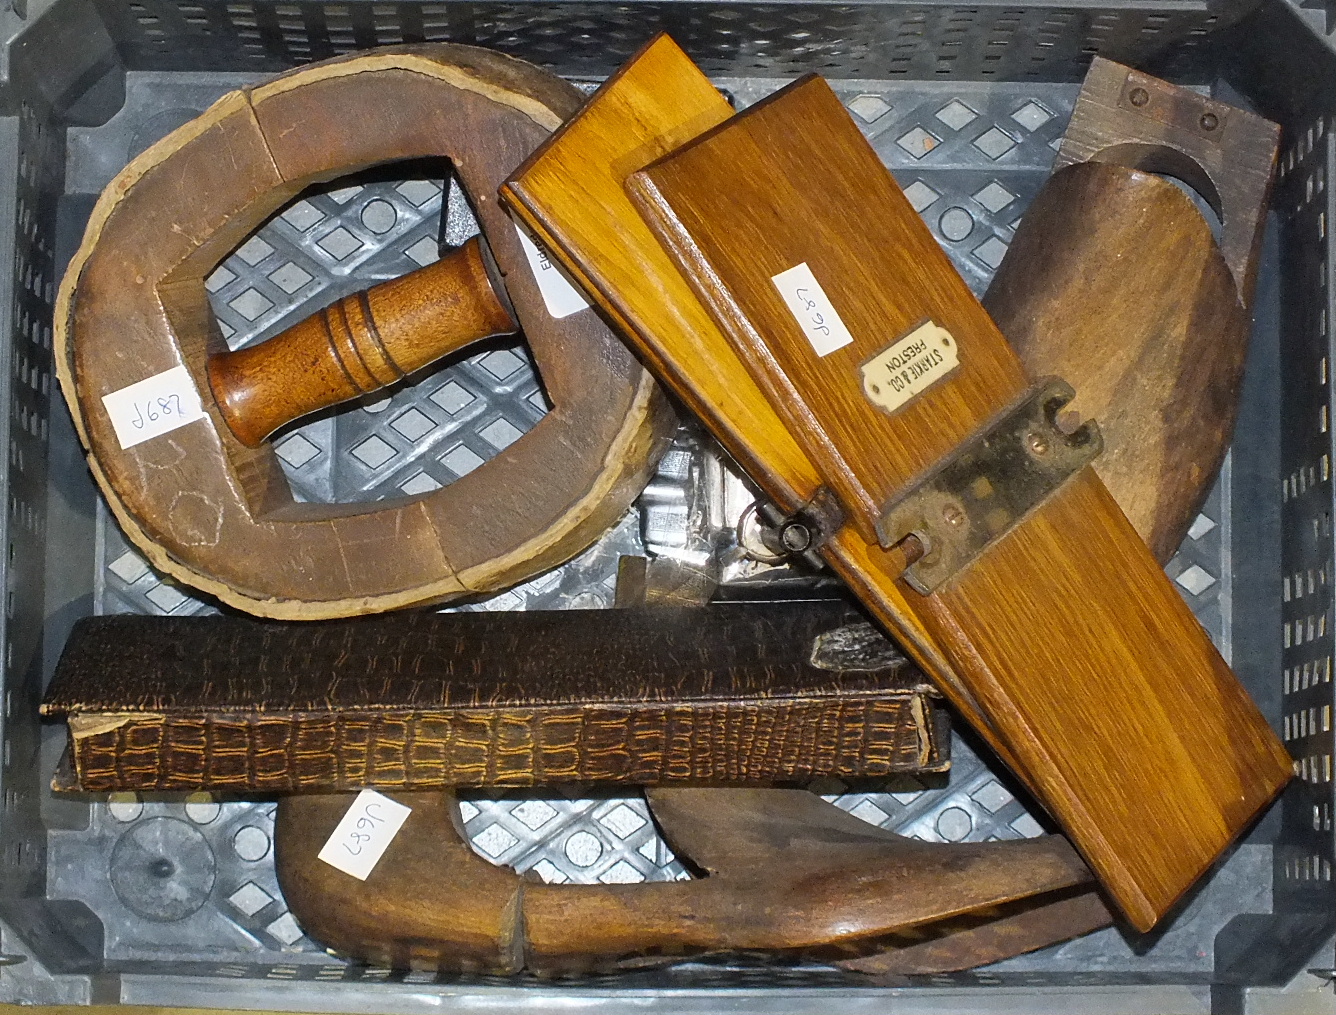 A wooden hat stretcher and other items.